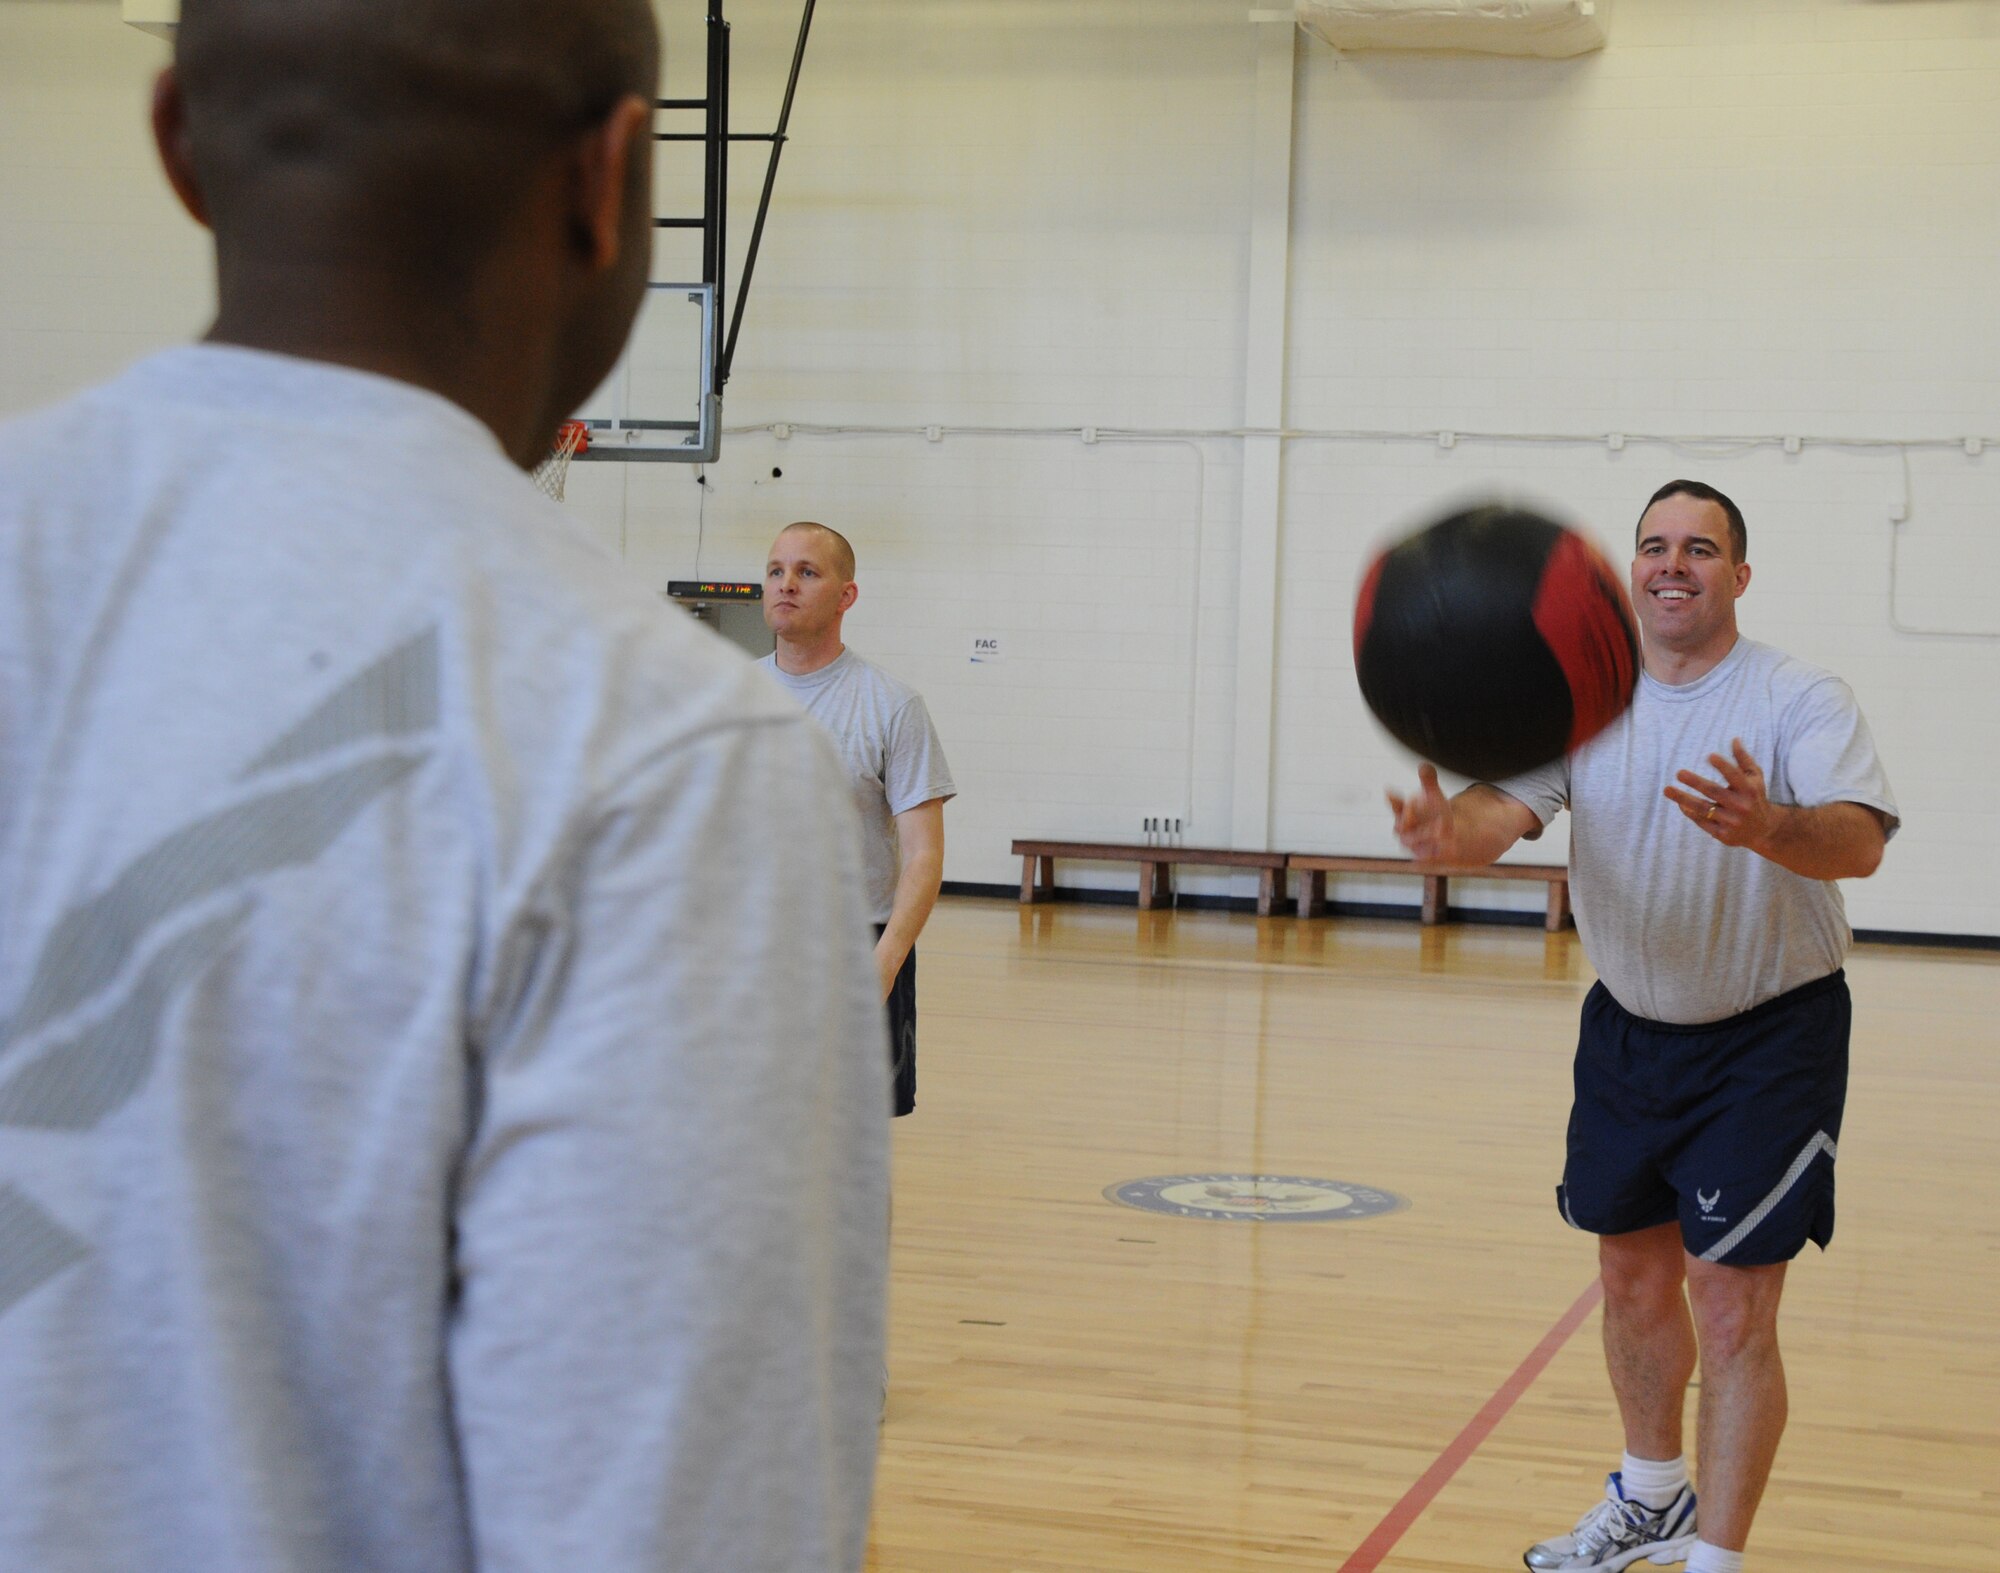 Lt. Col. Jody Ogea, Air Force District of Washington manpower and personnel
deputy, catches a medicine ball March 1 at the West Fitness Center, Joint
Base Andrews, Md. The February Fitness Challenge capstone event featured a
relay race, medicine ball toss, blind free throws, a three-legged race and
Dodge ball. (U.S. Air Force photo by Airman 1st Class Tabitha N. Haynes)
